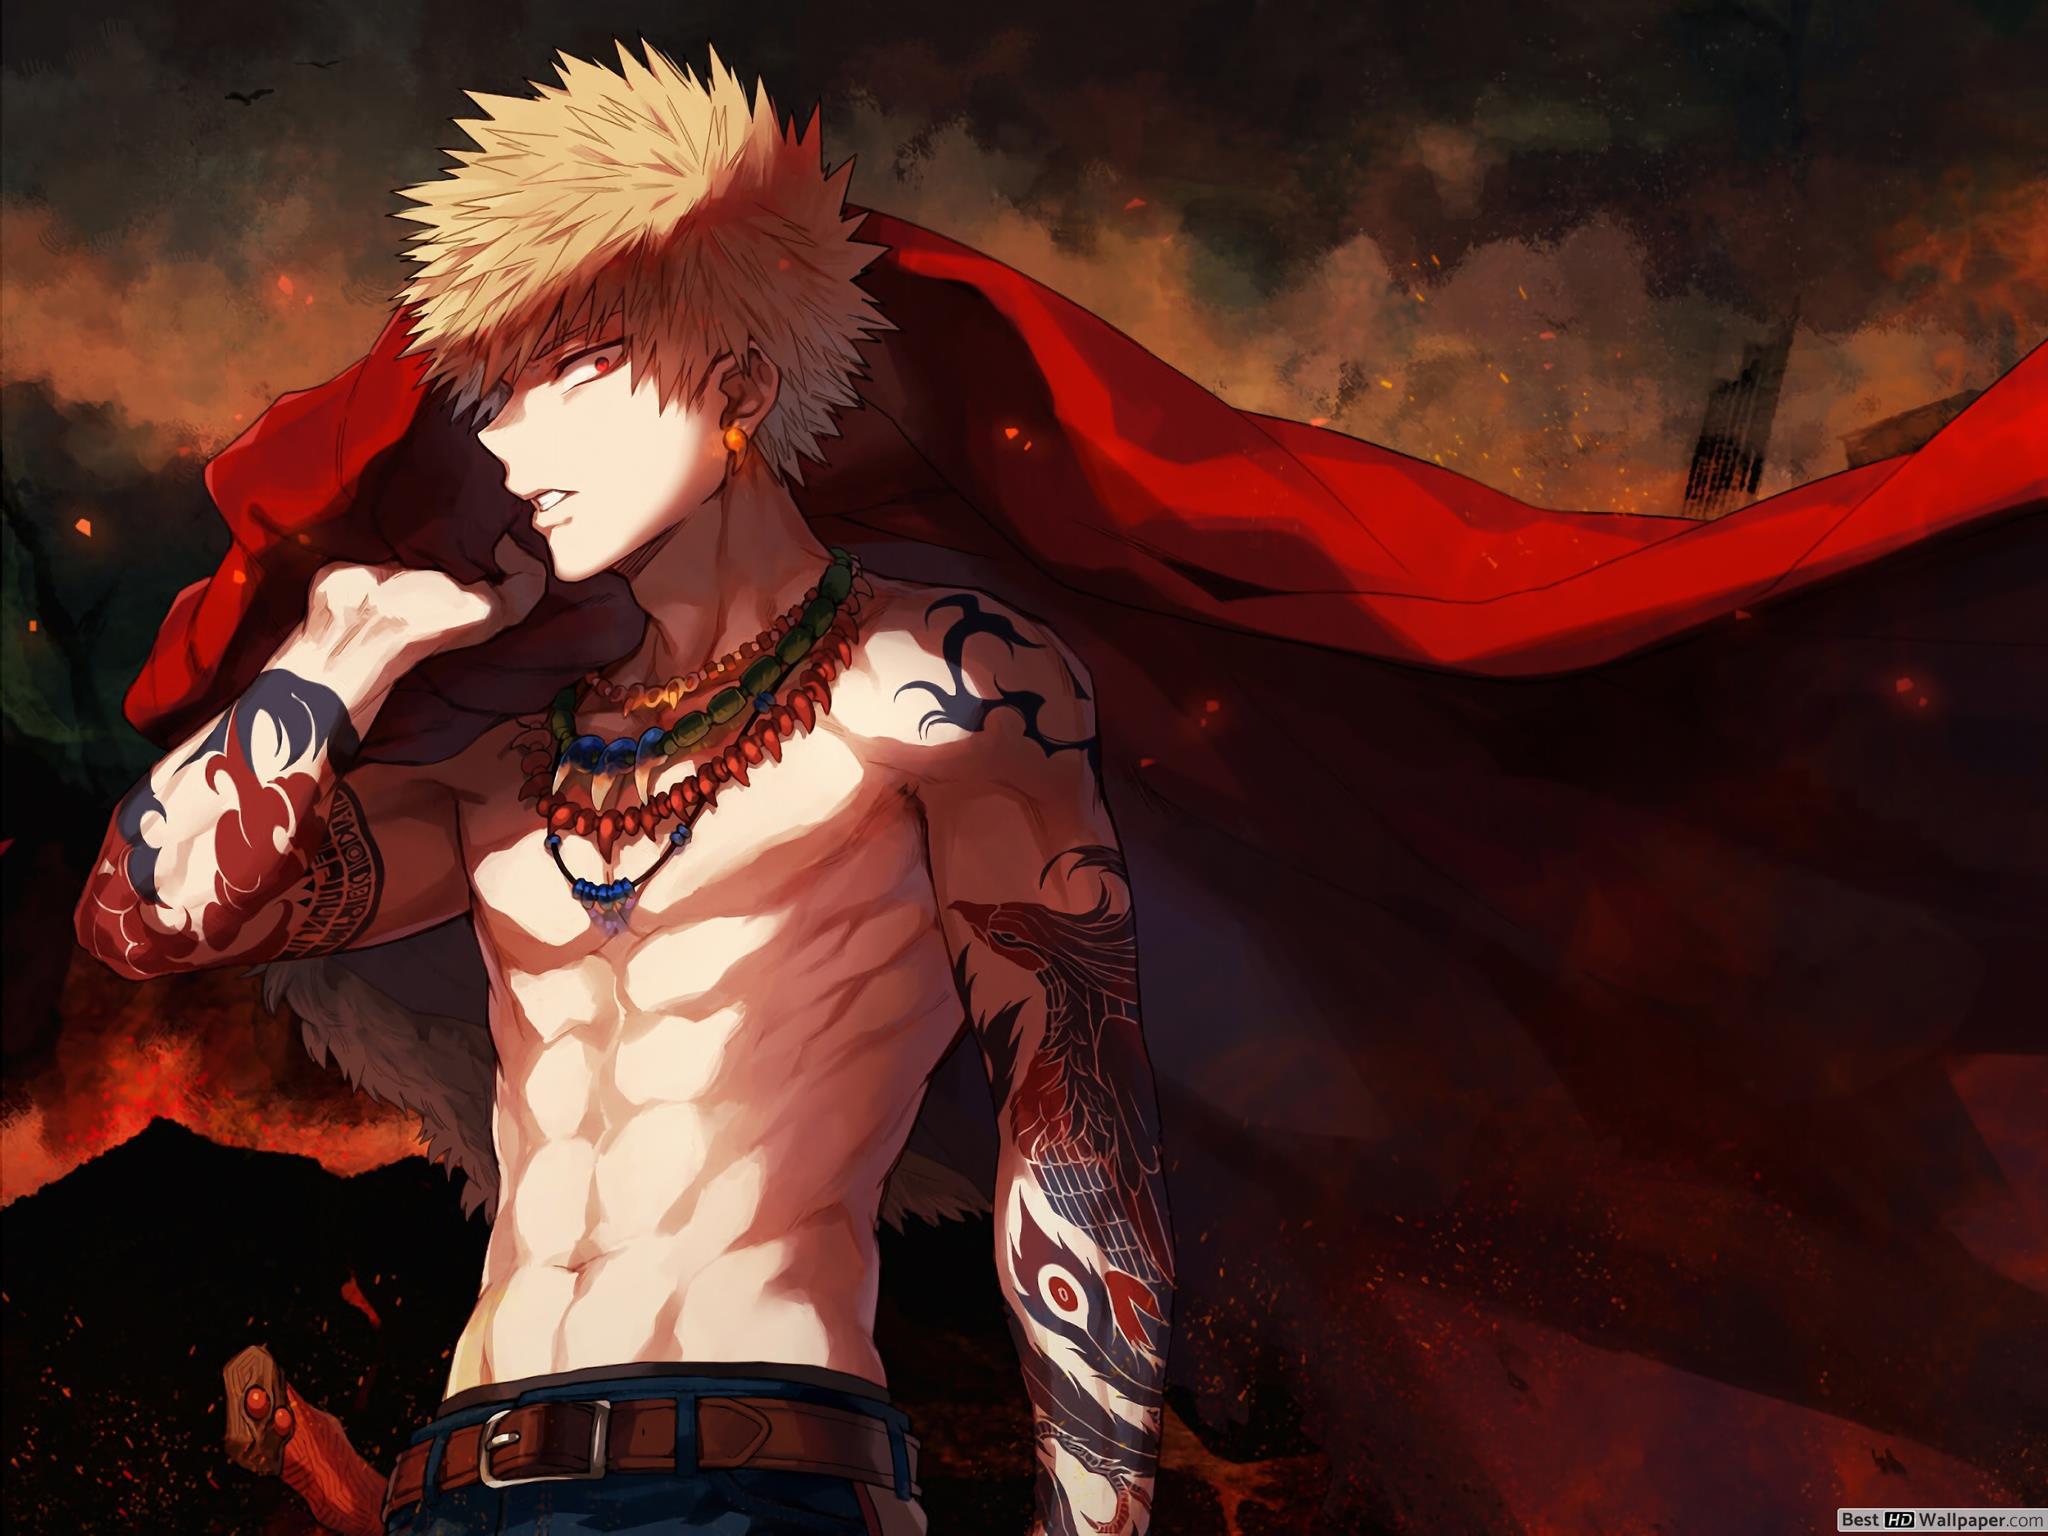 Action Anime Hd Wallpapers - Wallpaper Cave